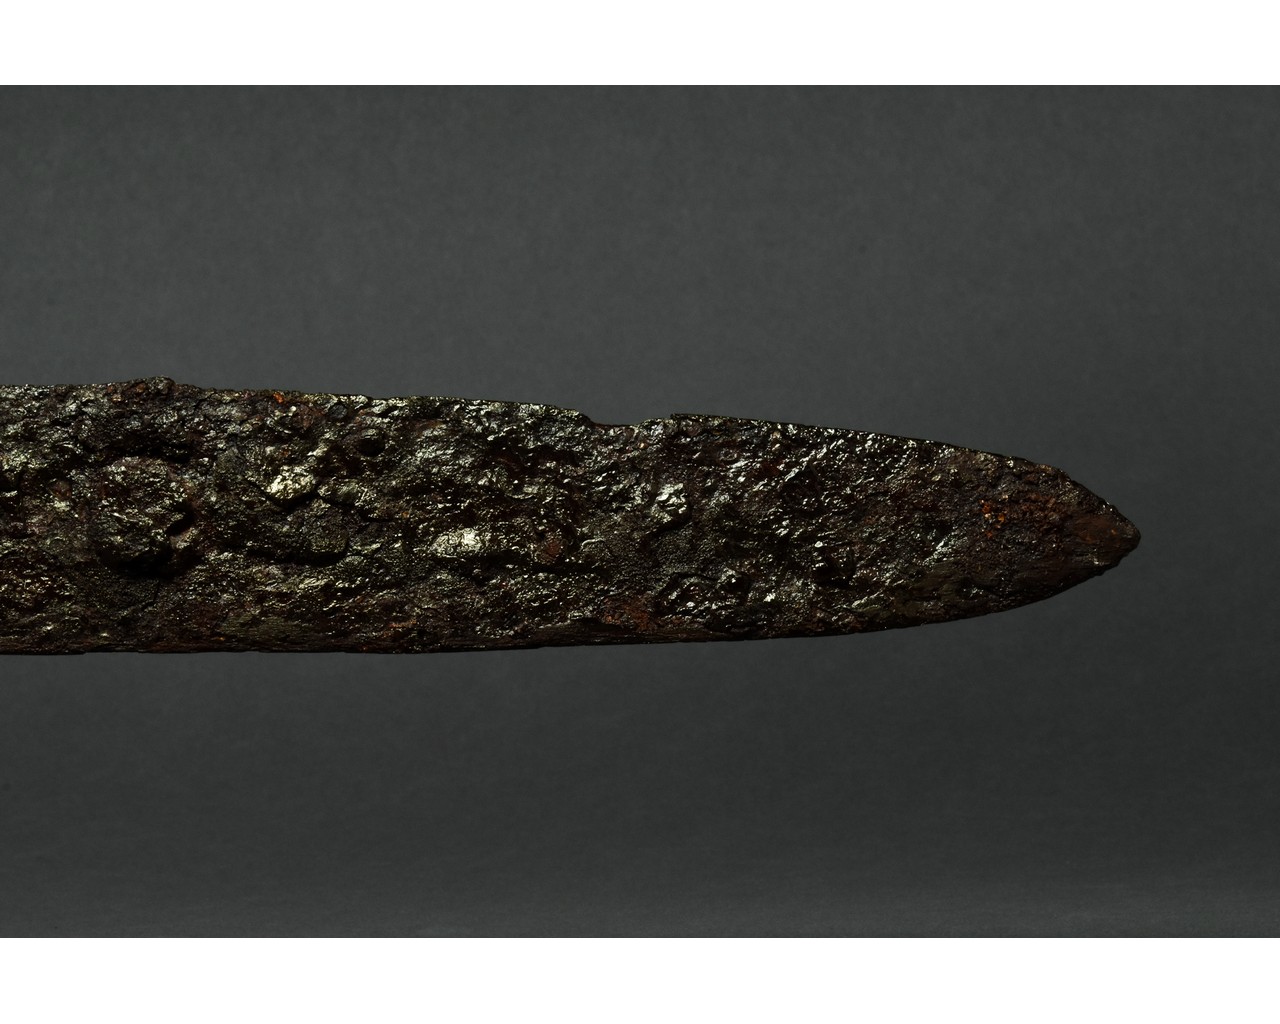 LATE ROMAN IRON SPATHA SWORD WITH BRONZE POMMEL - Image 6 of 7